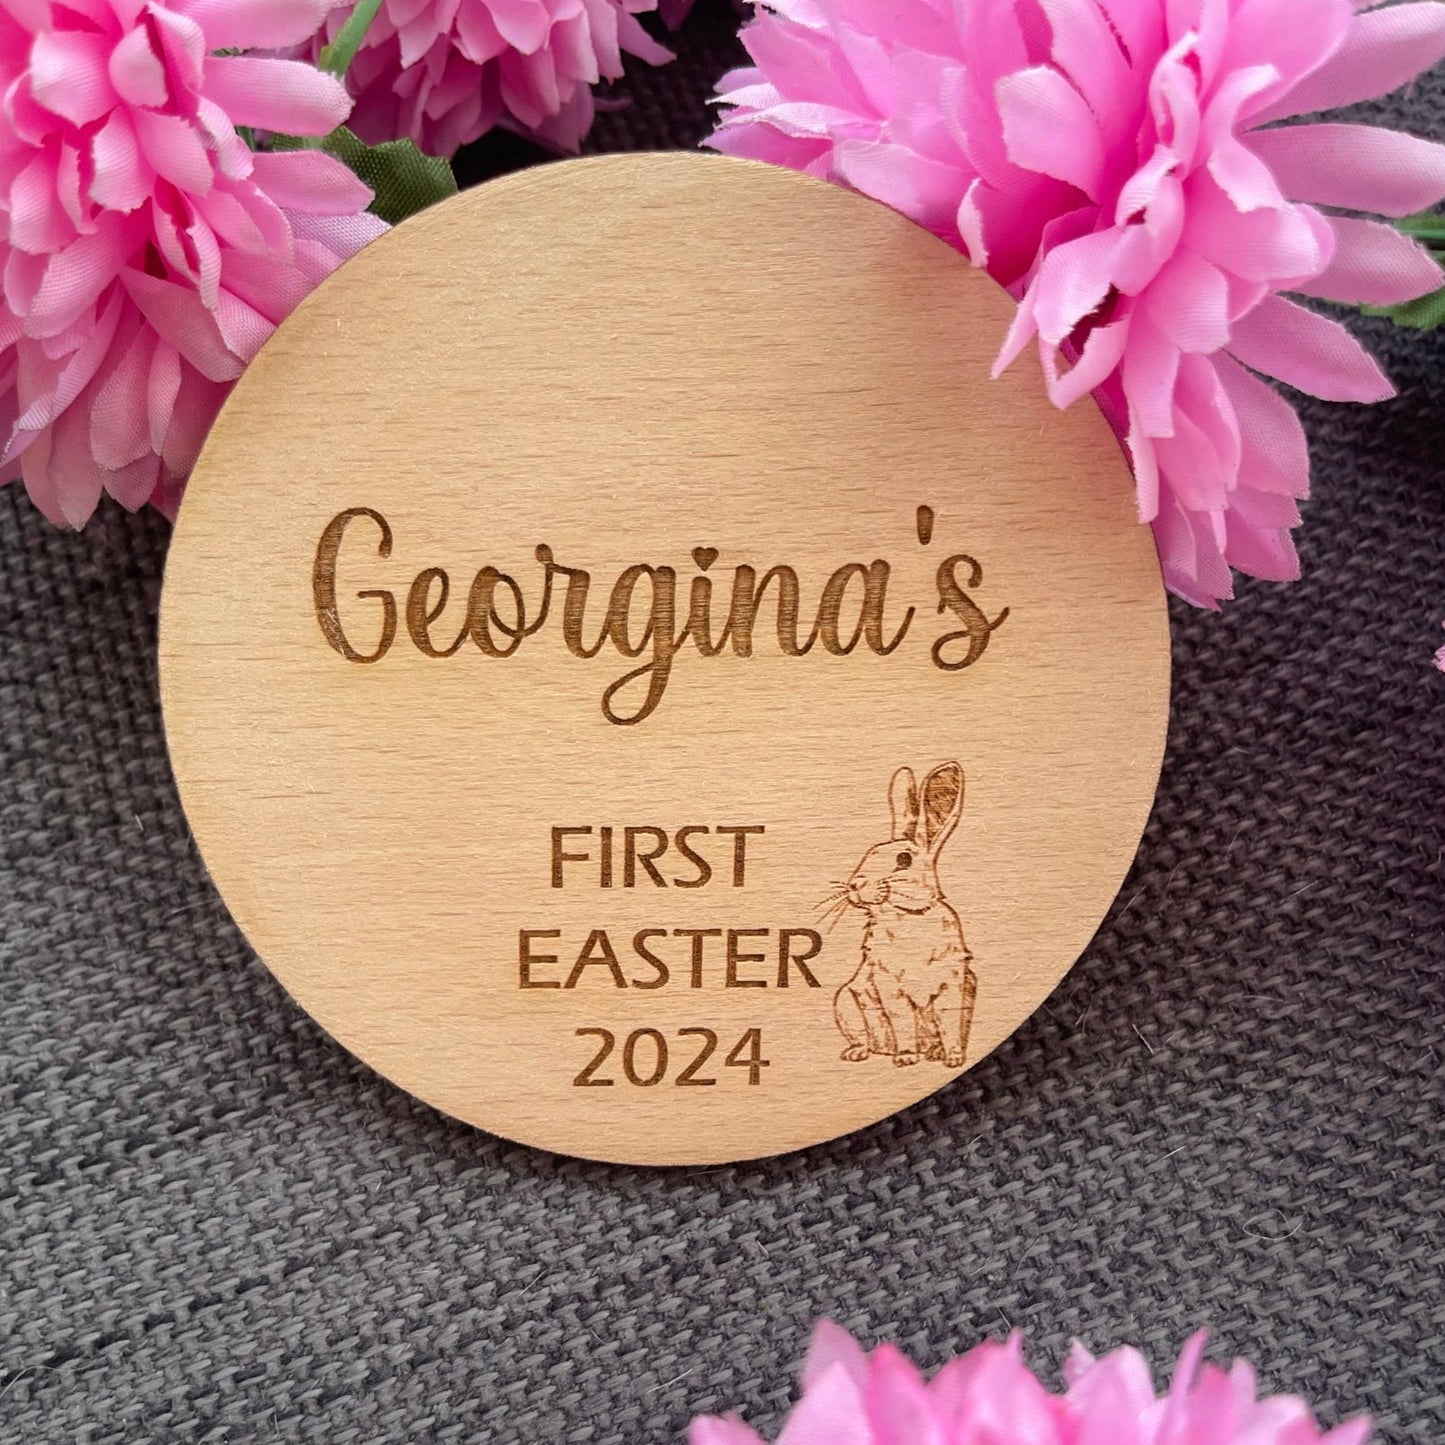 Make your baby's first Easter special with a Personalised Engraved Name Plaque. Crafted from Beech veneer, this 4mm thick keepsake adds charm to photos. Sizes available: 10cmX10cm or 15cmX15CM.